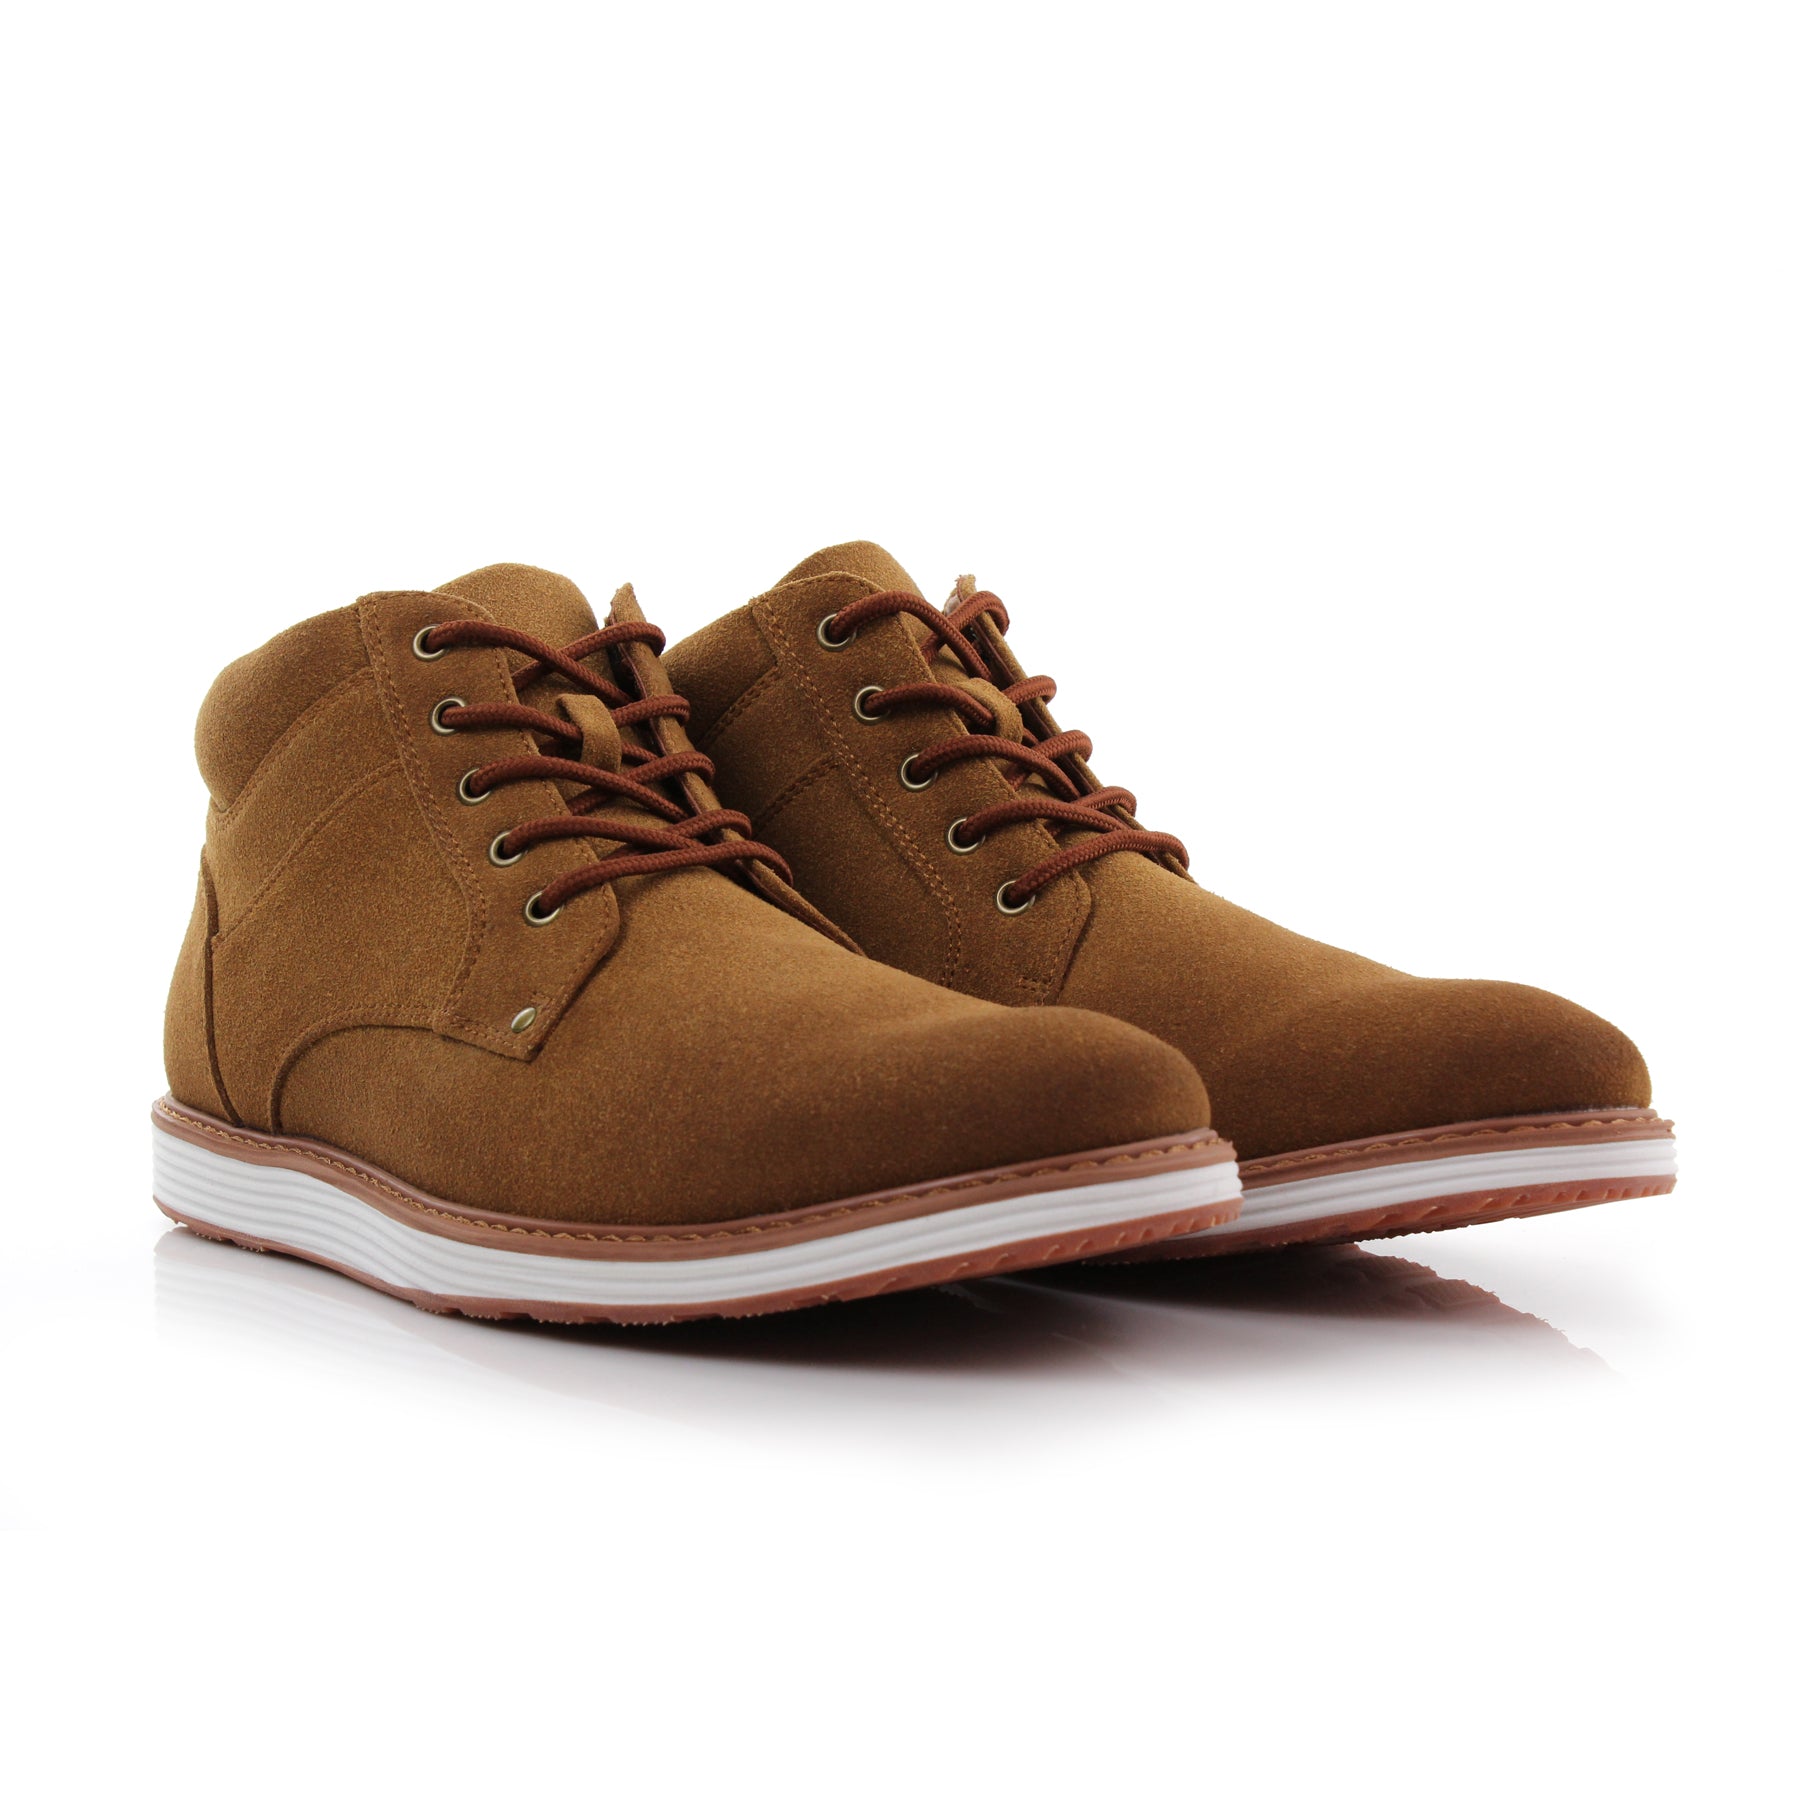 Suede Sneakers | Jax by Ferro Aldo | Conal Footwear | Paired Angle View